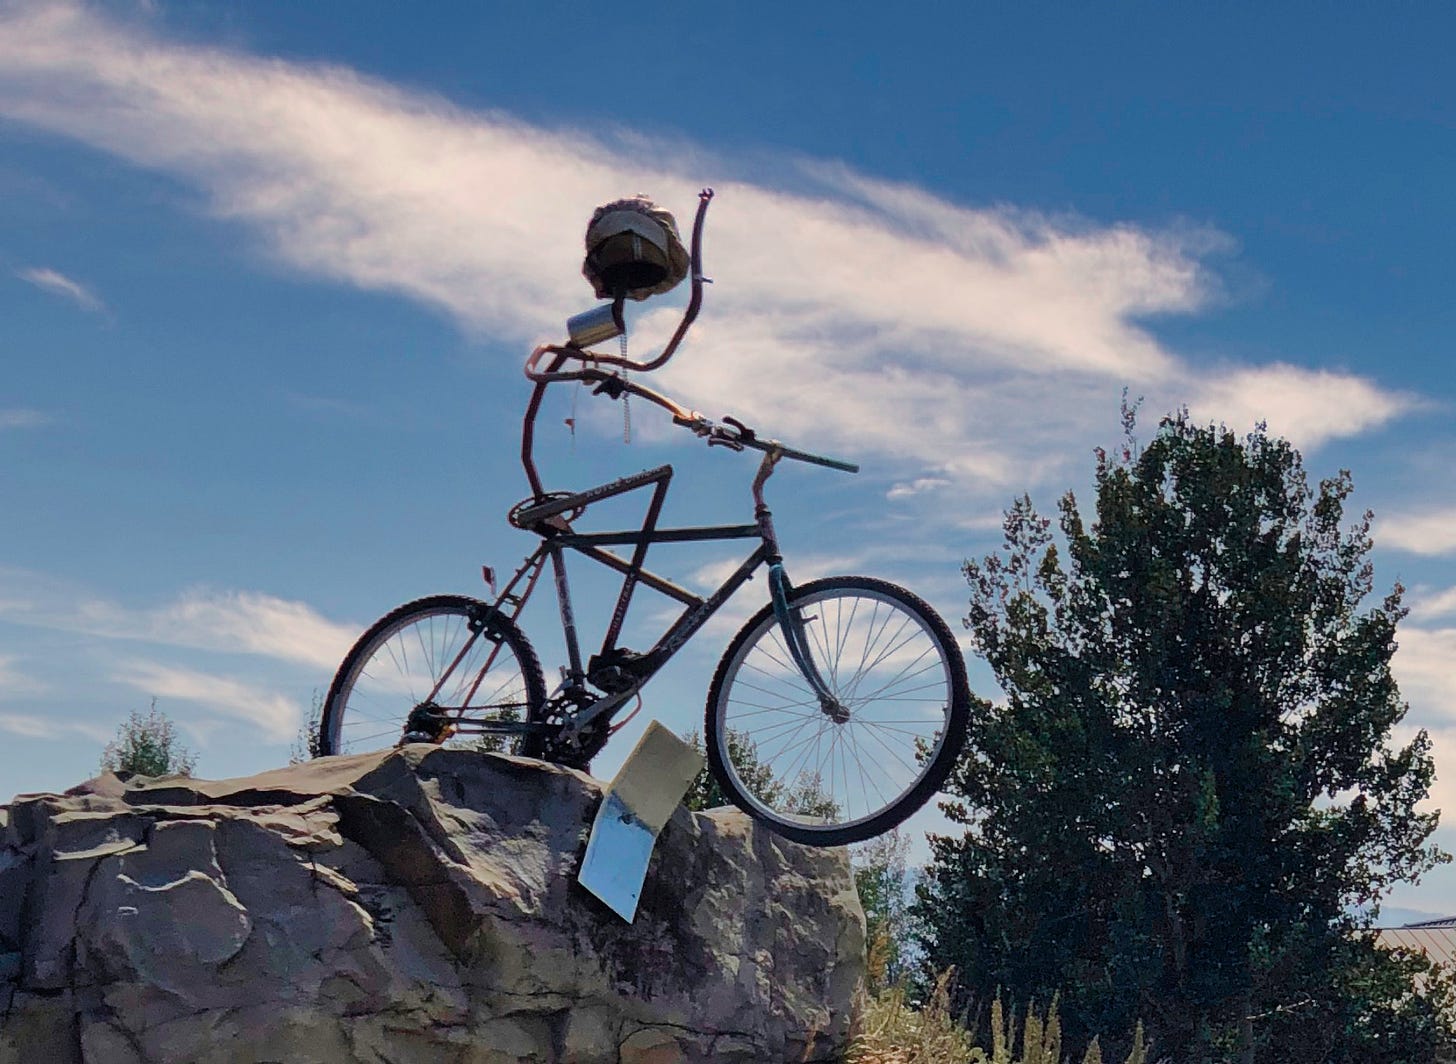 A sculpture of an old bicycle with a metal figure waving, wearing a white cap and about to ride off the side of a huge rock with their notebook falling near the rock and tire 